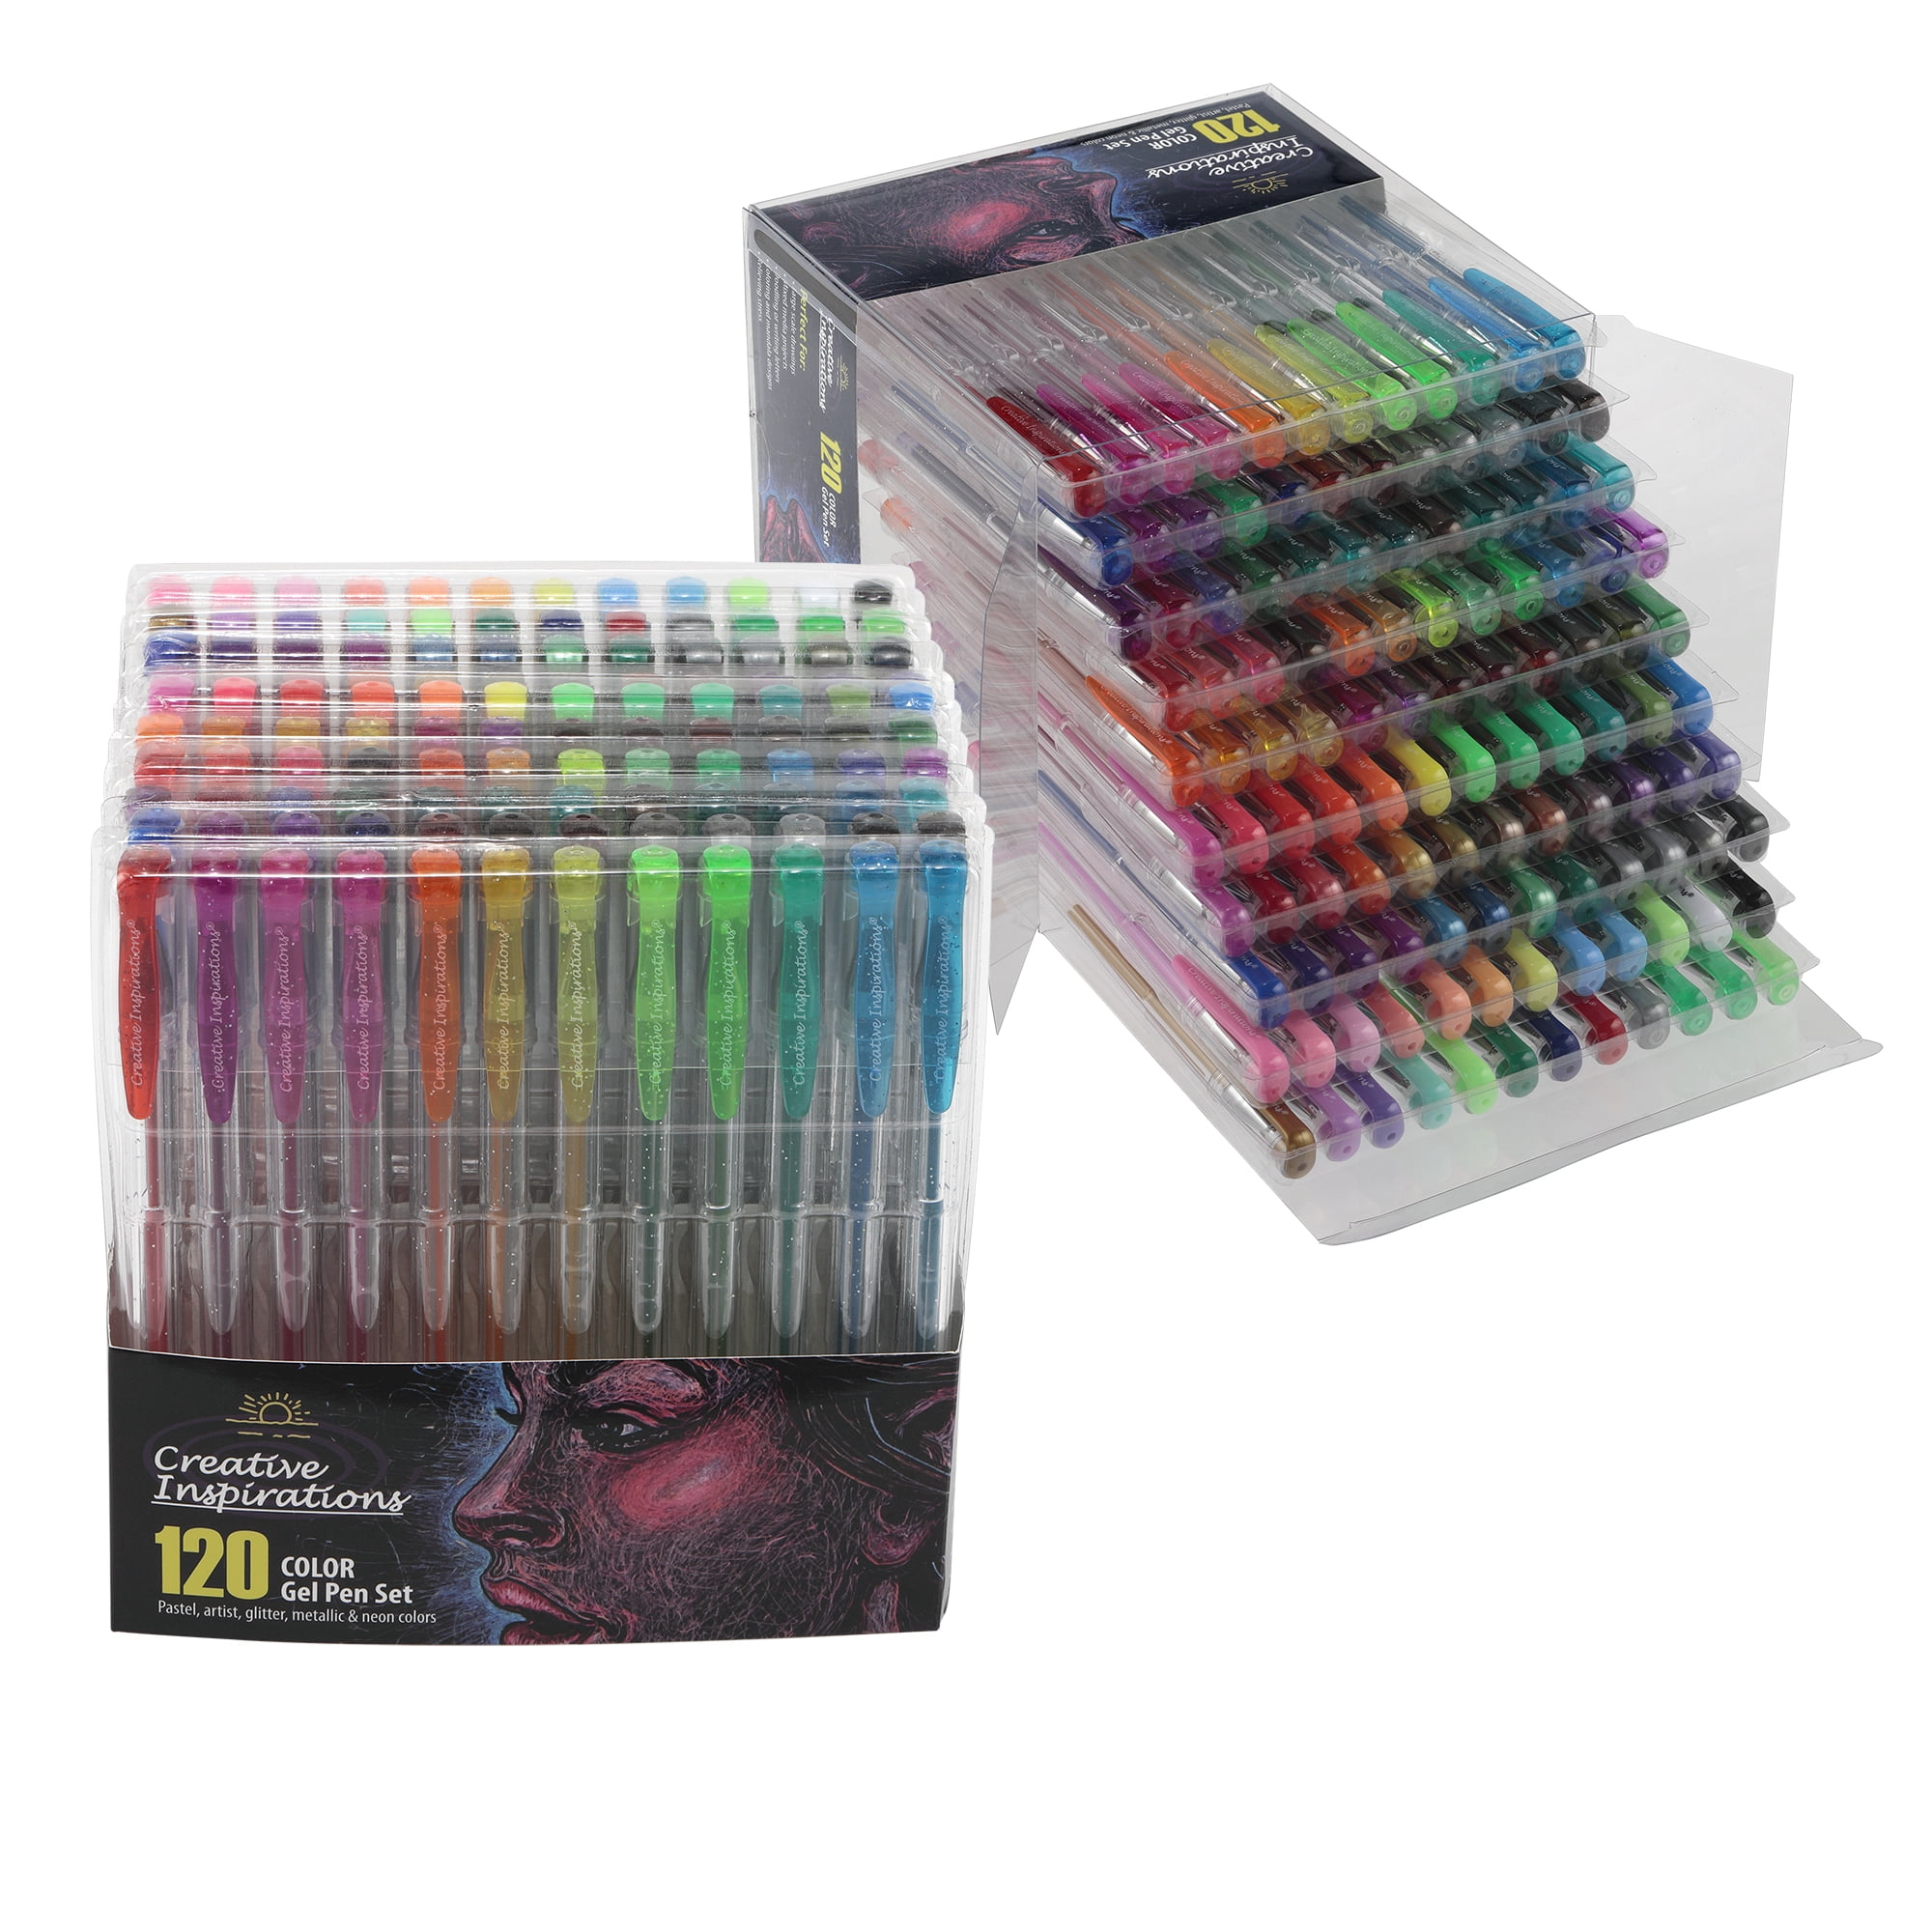 Creative Inspirations Gel Pen Sets - Long Lasting Performance, Vivid, and  Free-Flowing Ink Gel Pens for Artists, Bulk, Students, Classrooms, & More!  - Set of 120 